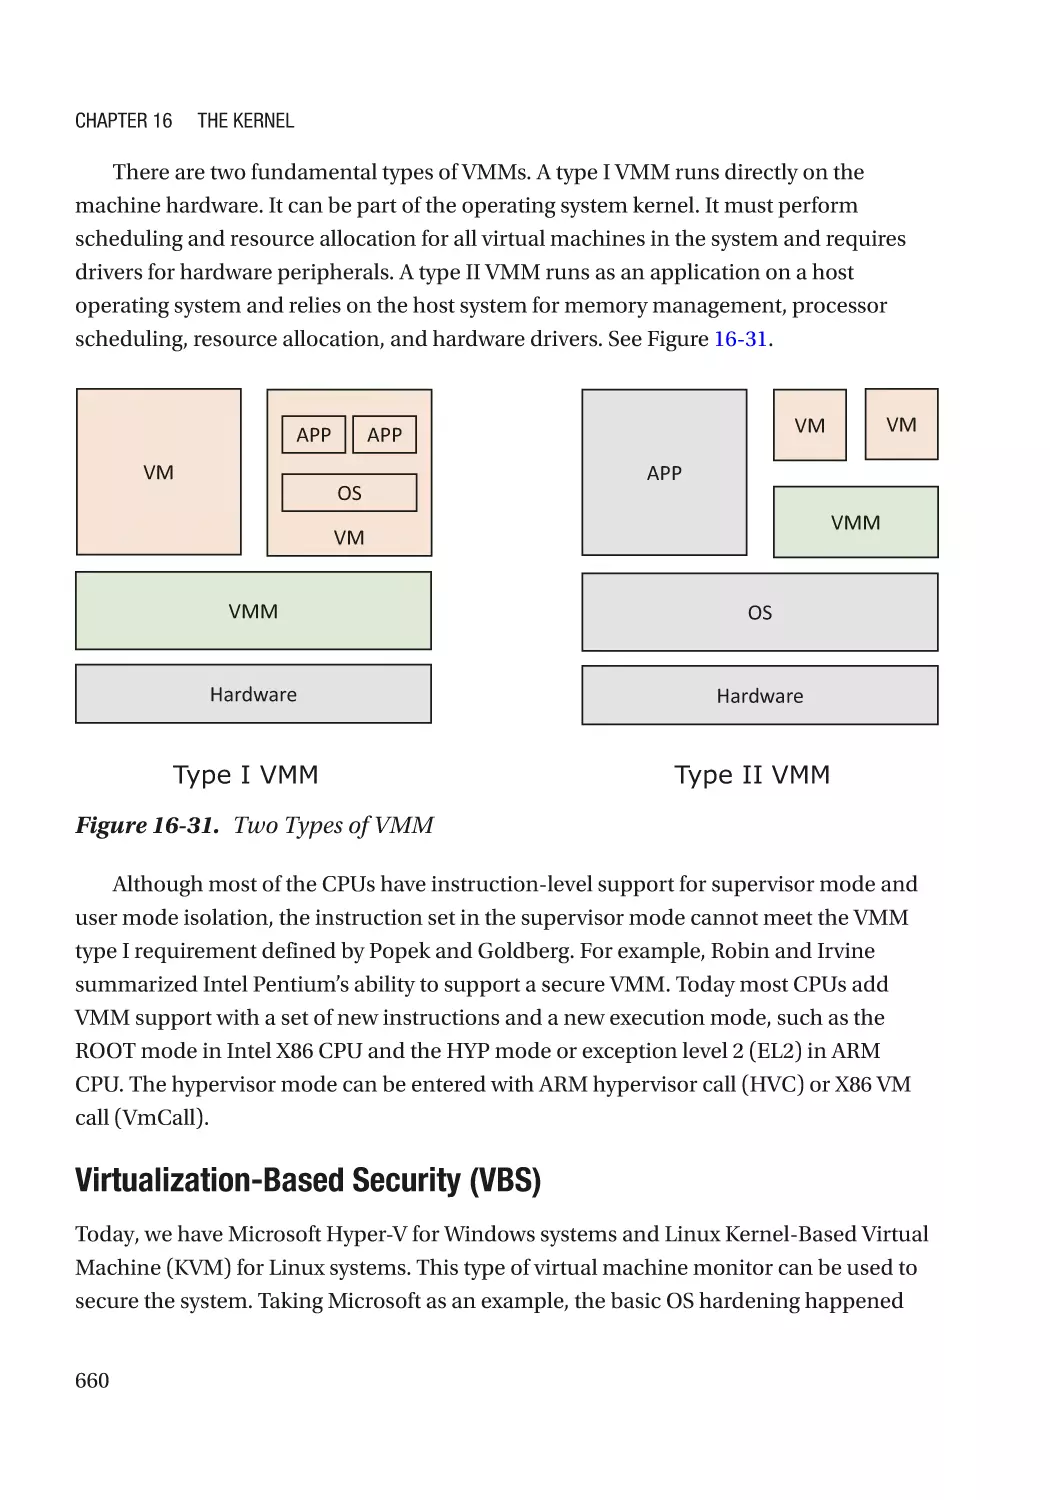 Virtualization-Based Security (VBS)